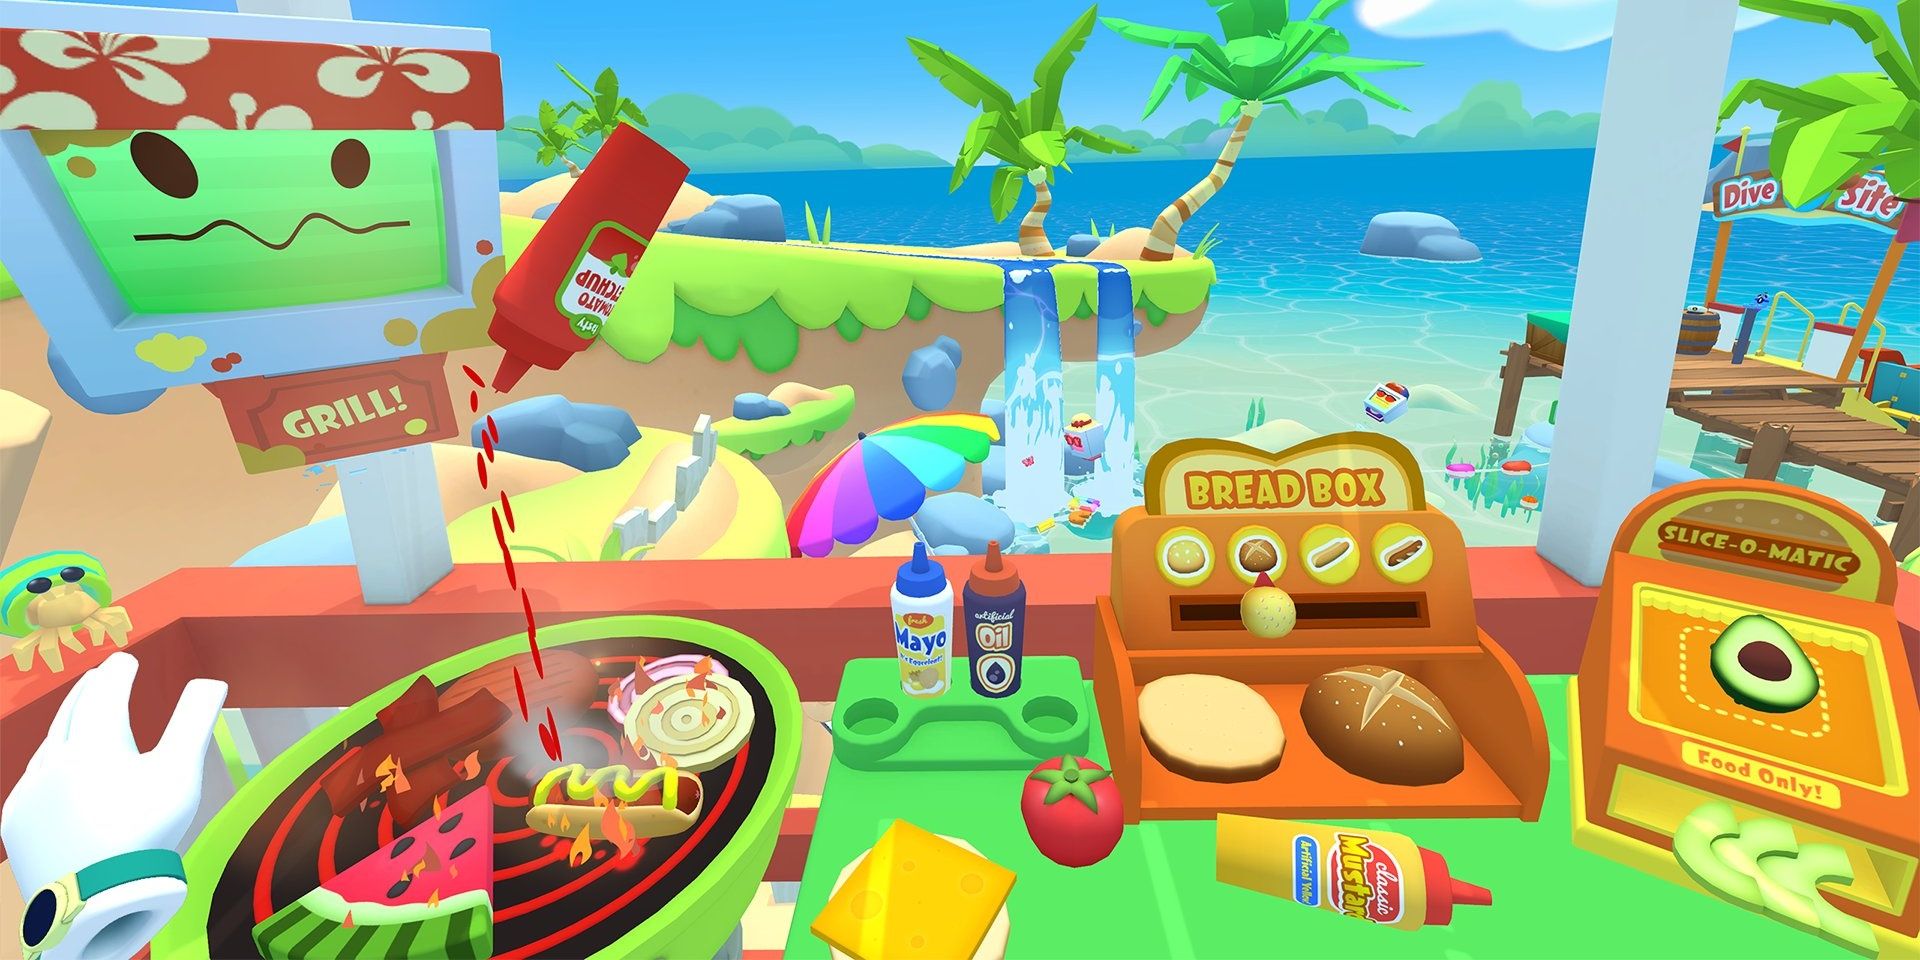 A player putting sauce on a hotdog in Vacation Simulator